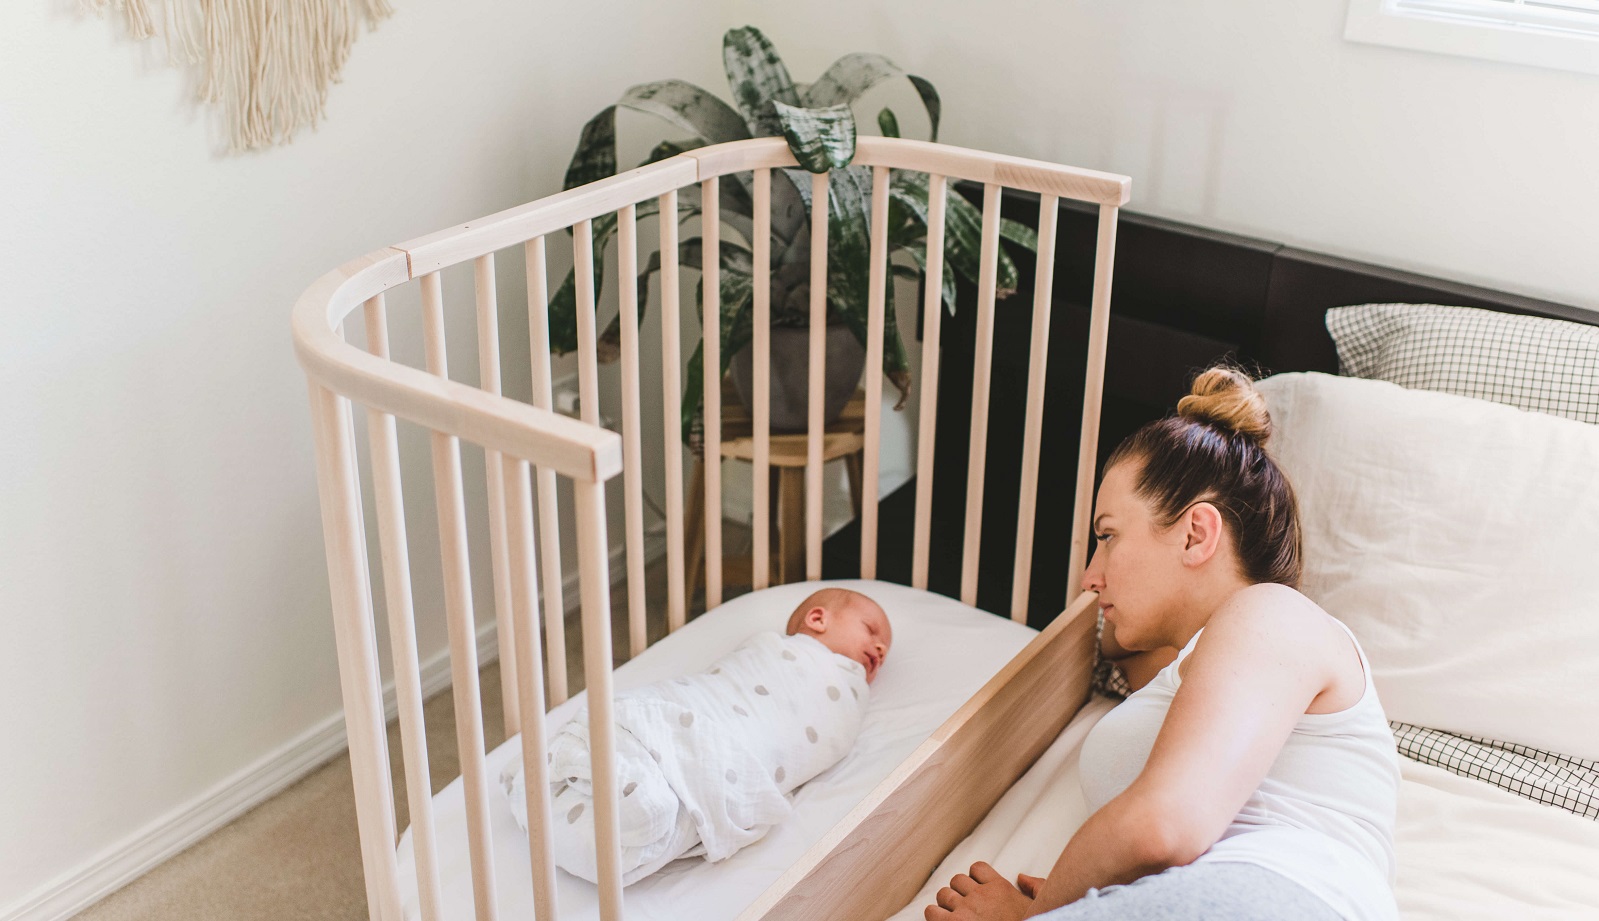 Why Asking “Is Co-Sleeping Bad?” Misses the Real Point